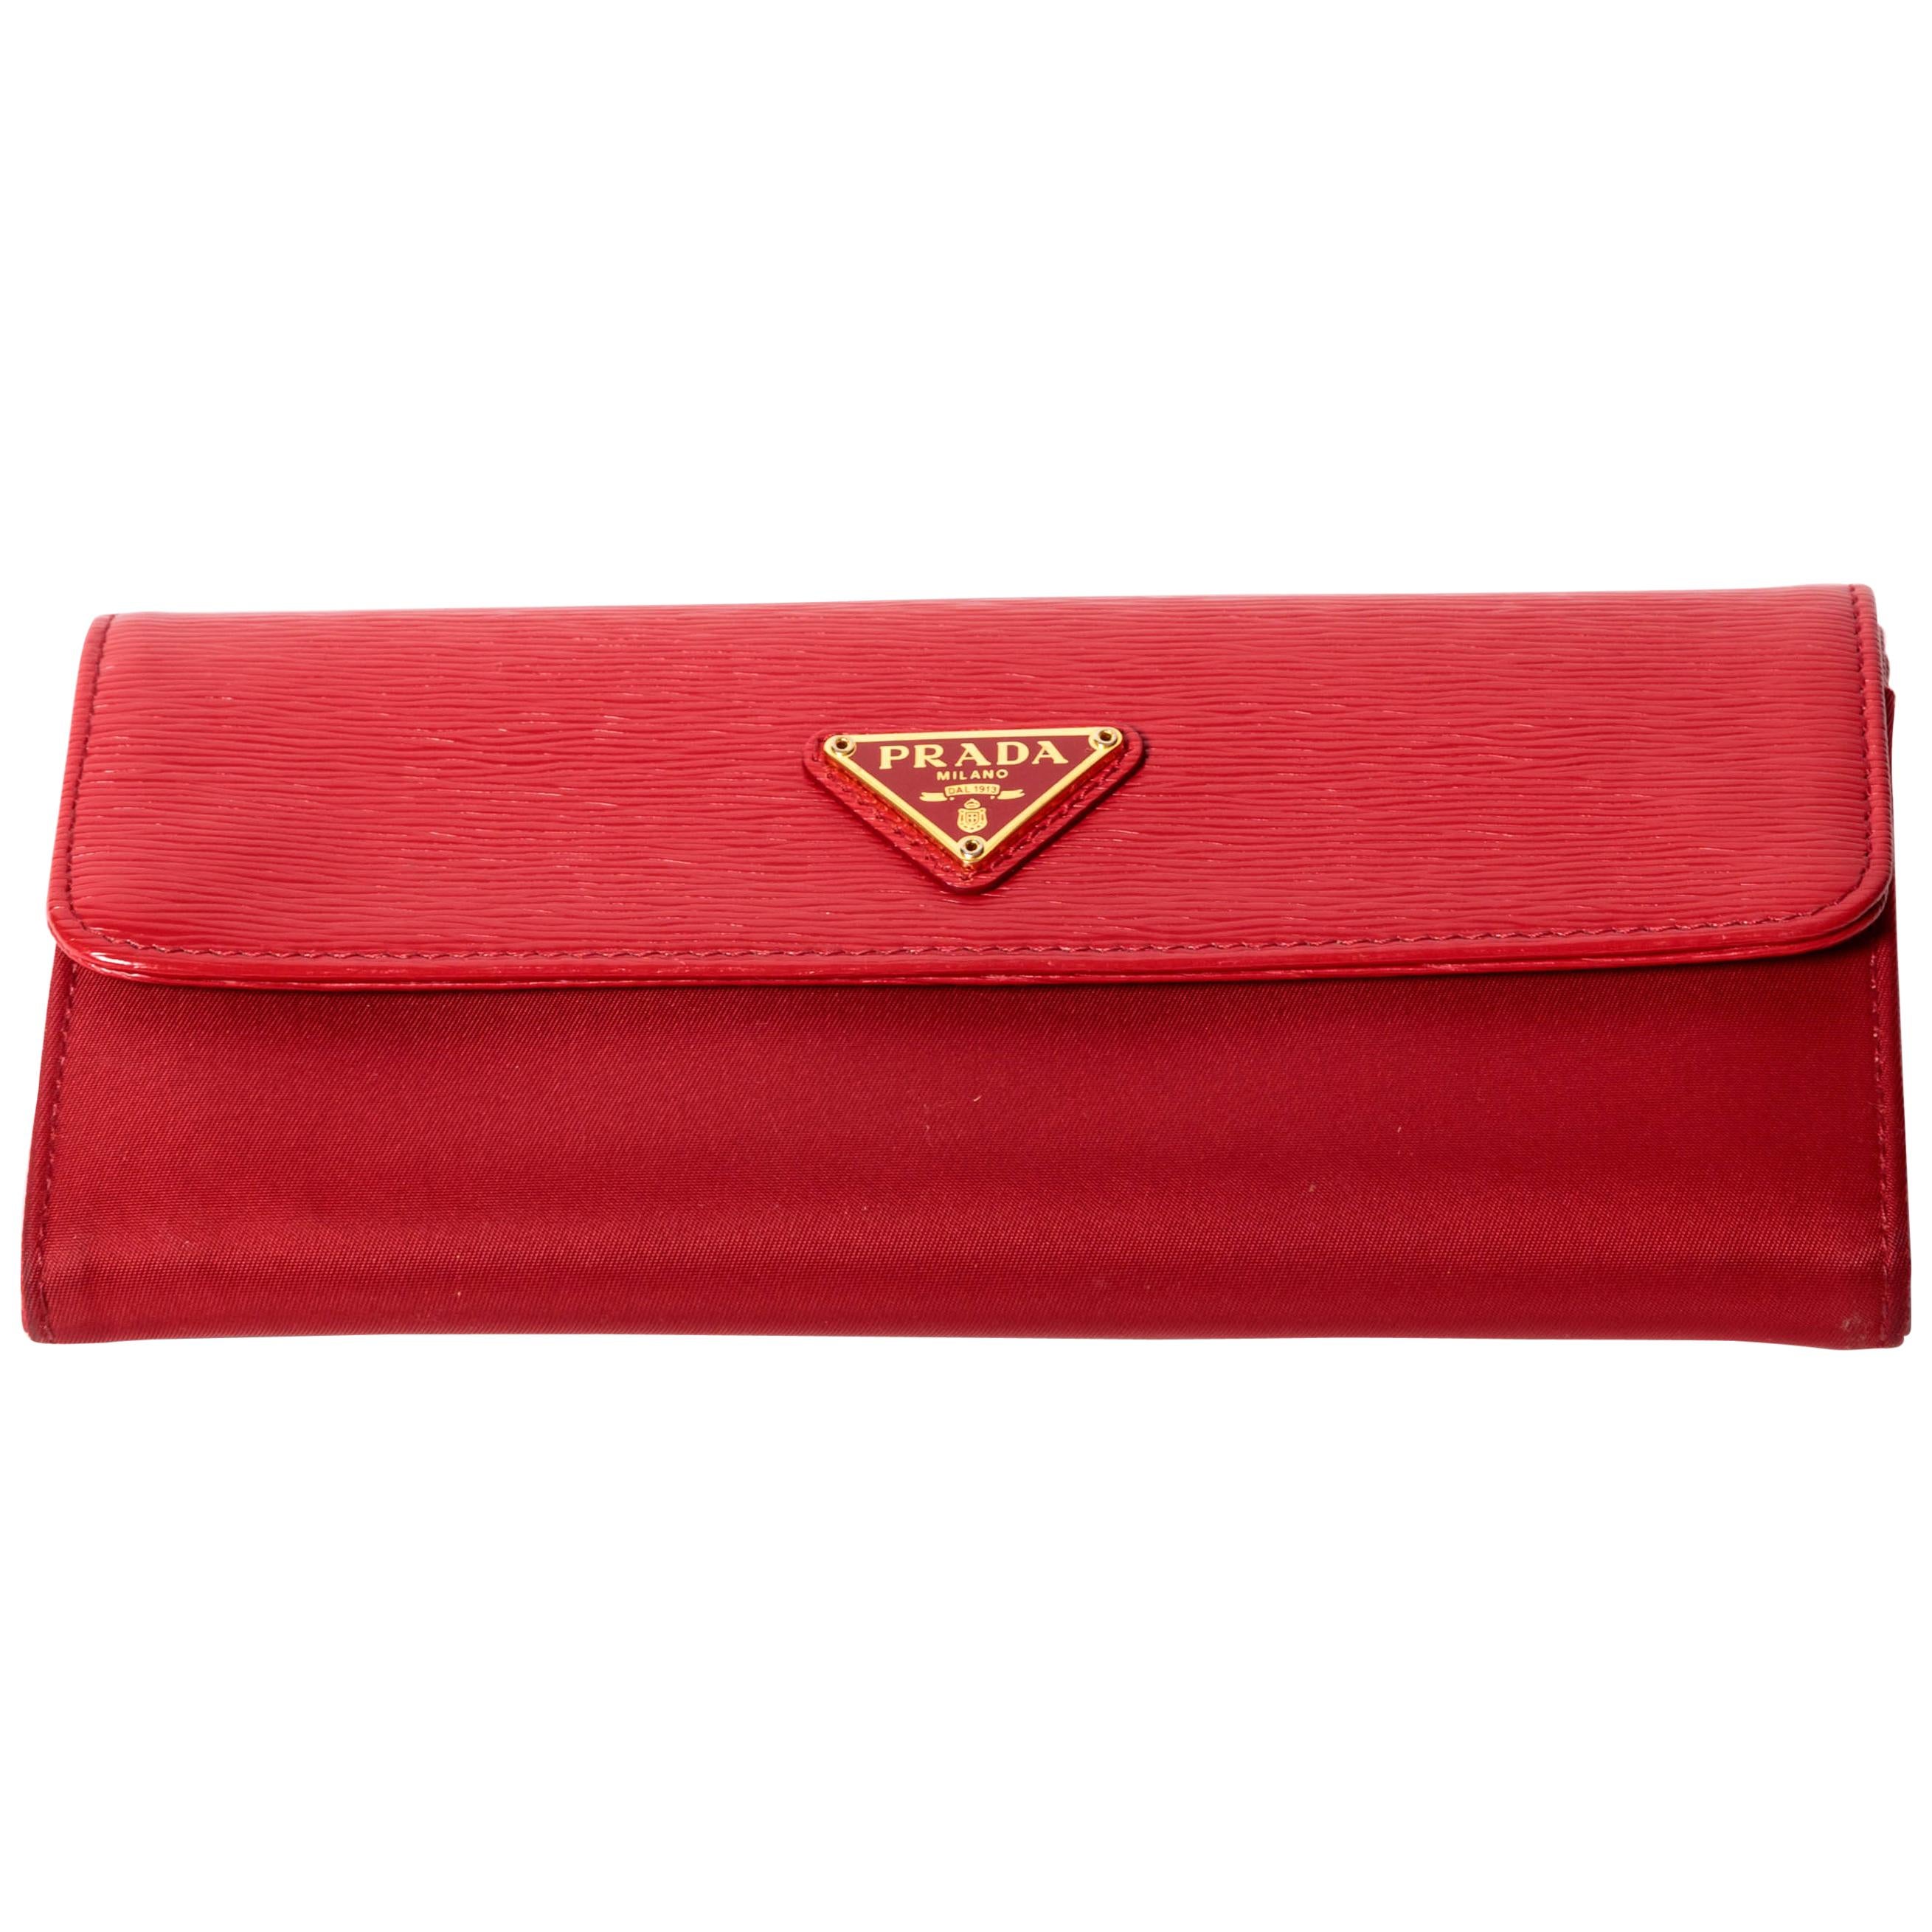 Prada Nylon and Leather Red Snap Long Wallet with Box For Sale